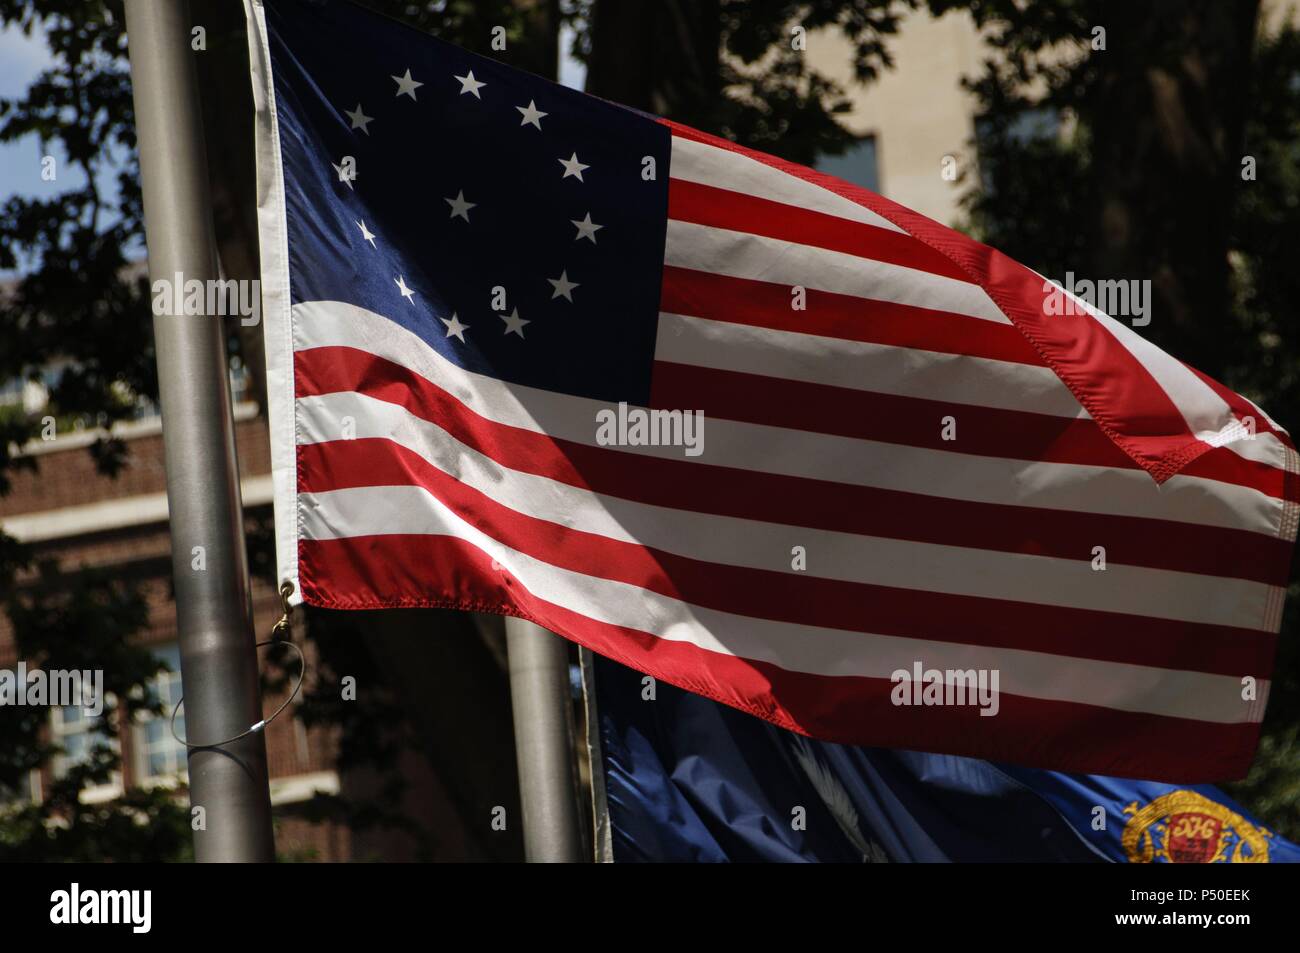 Betsy Ross flag. Early desing of the Flag of the United States. The 13 stars represent the original 13 colonies.  Philadelphia. Pennsylvania. Usa. Stock Photo